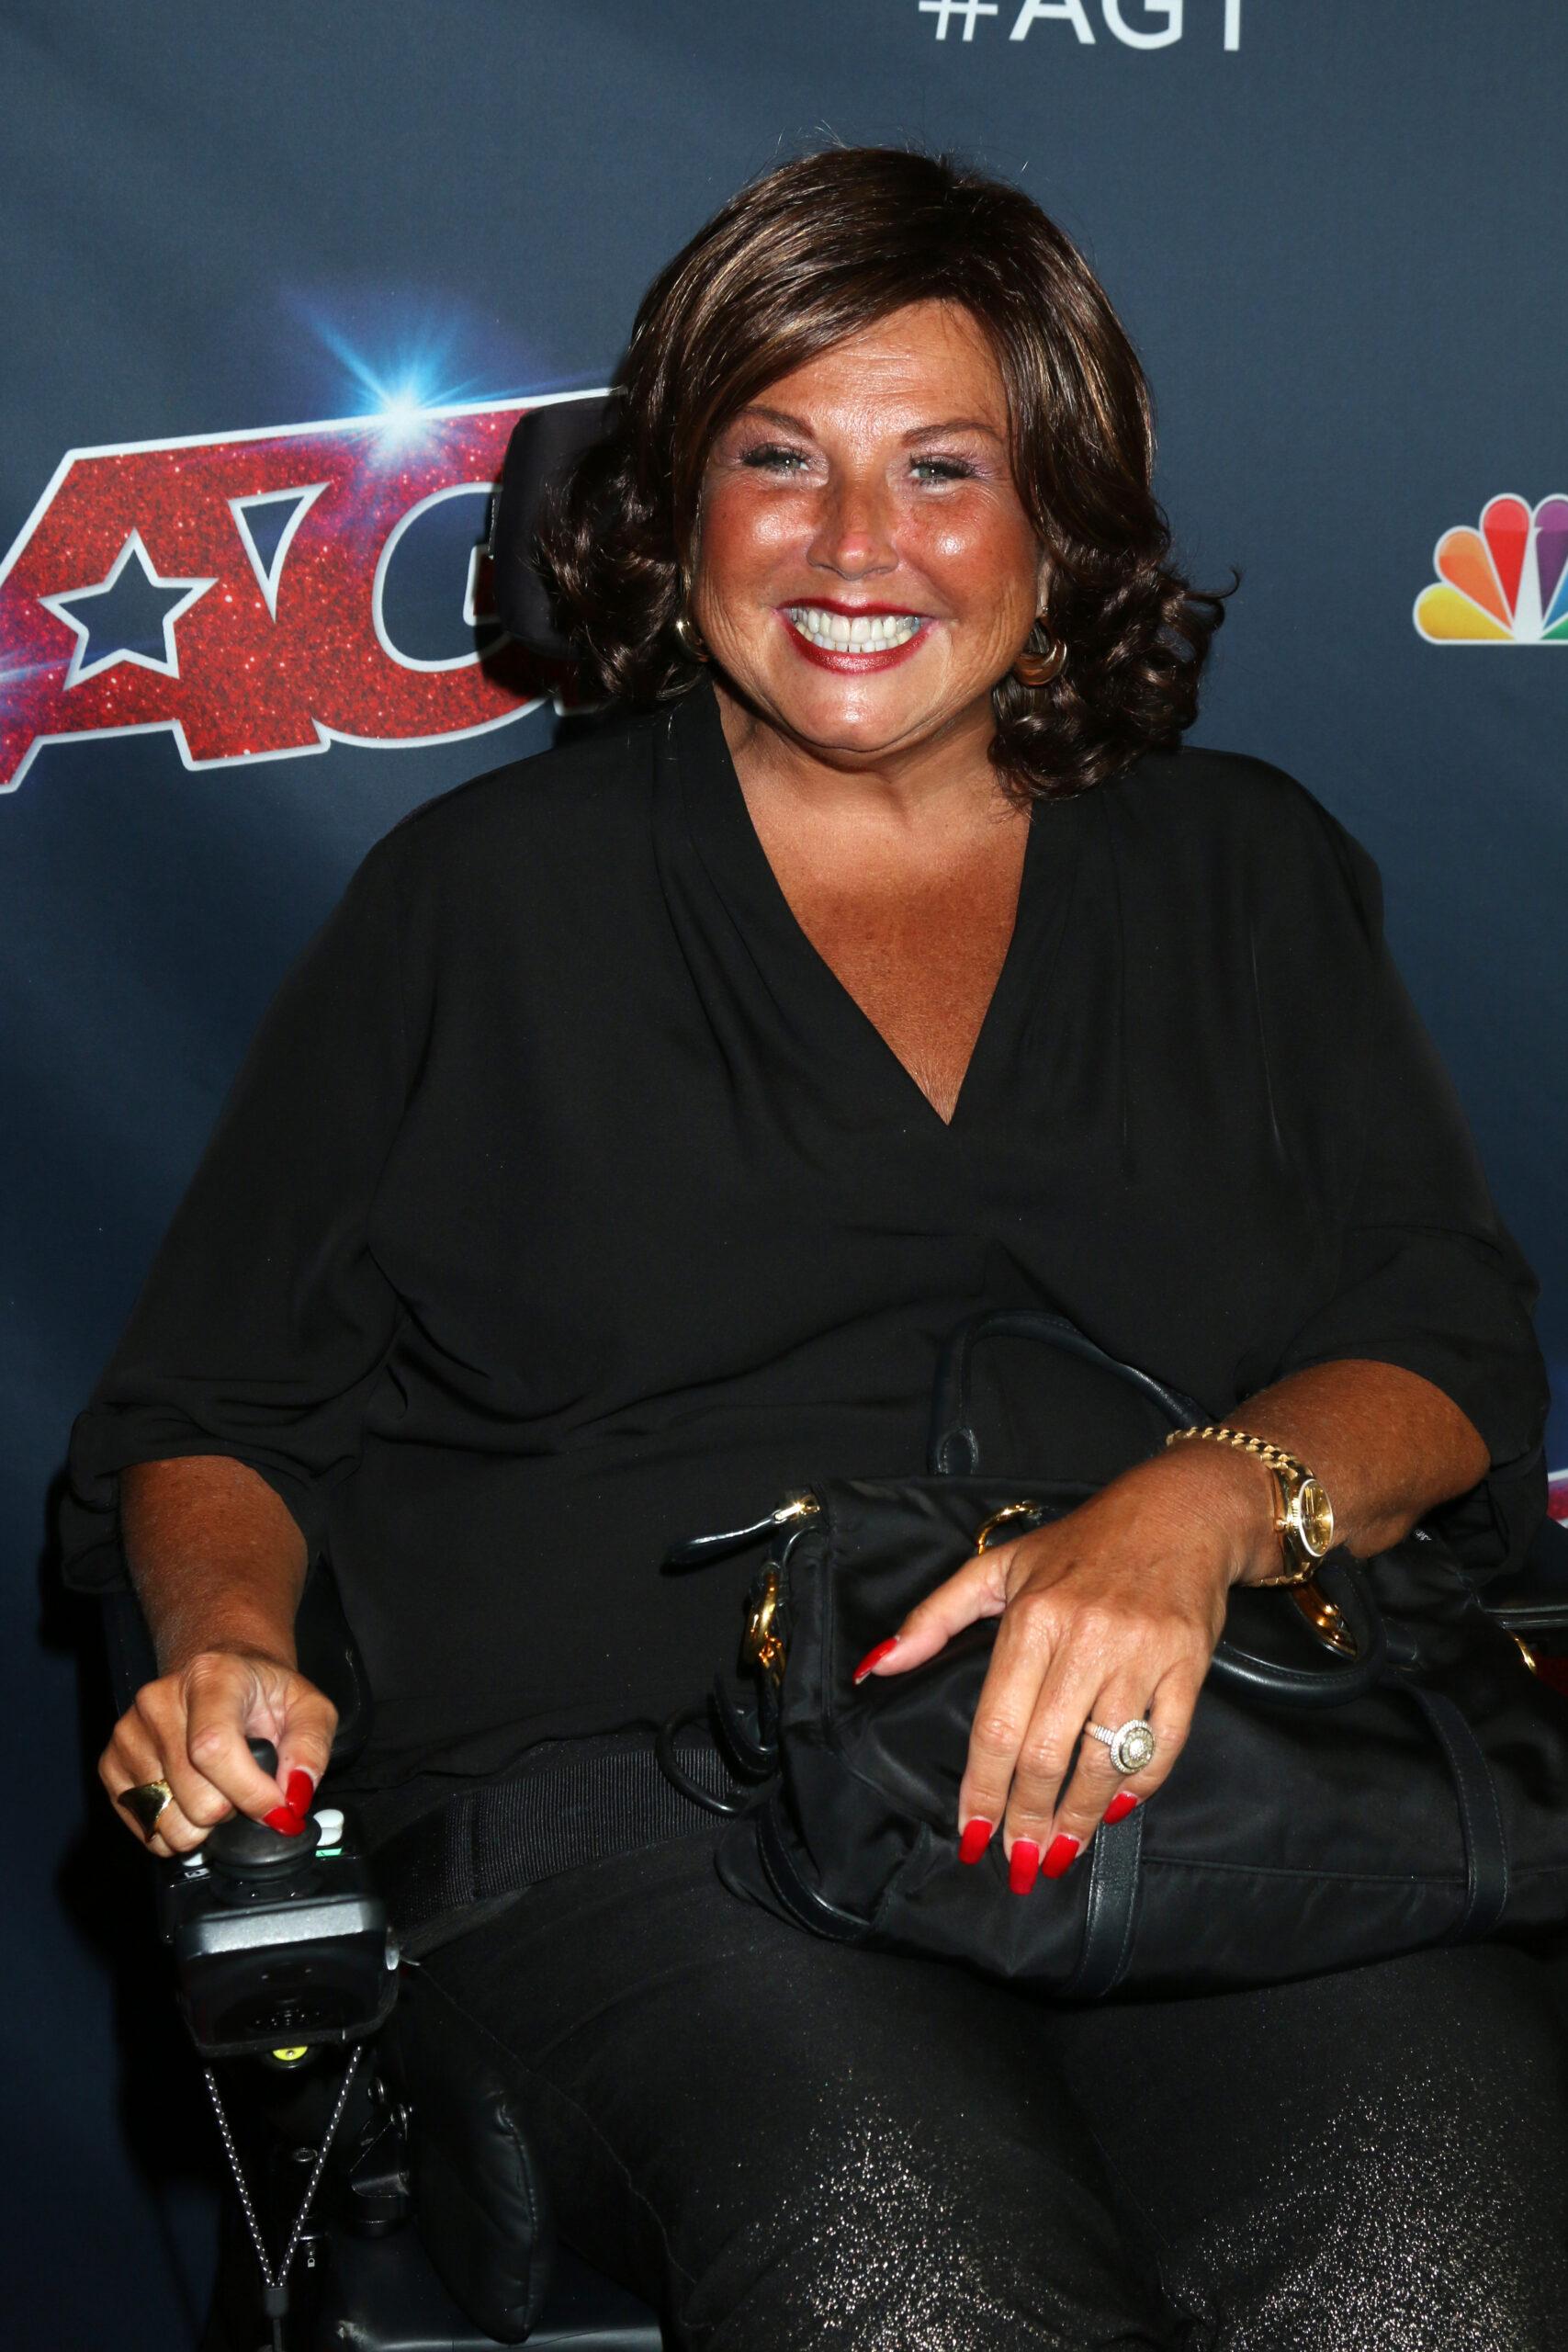 Abby Lee Miller at "America's Got Talent" Season 14 Live Show Red Carpet